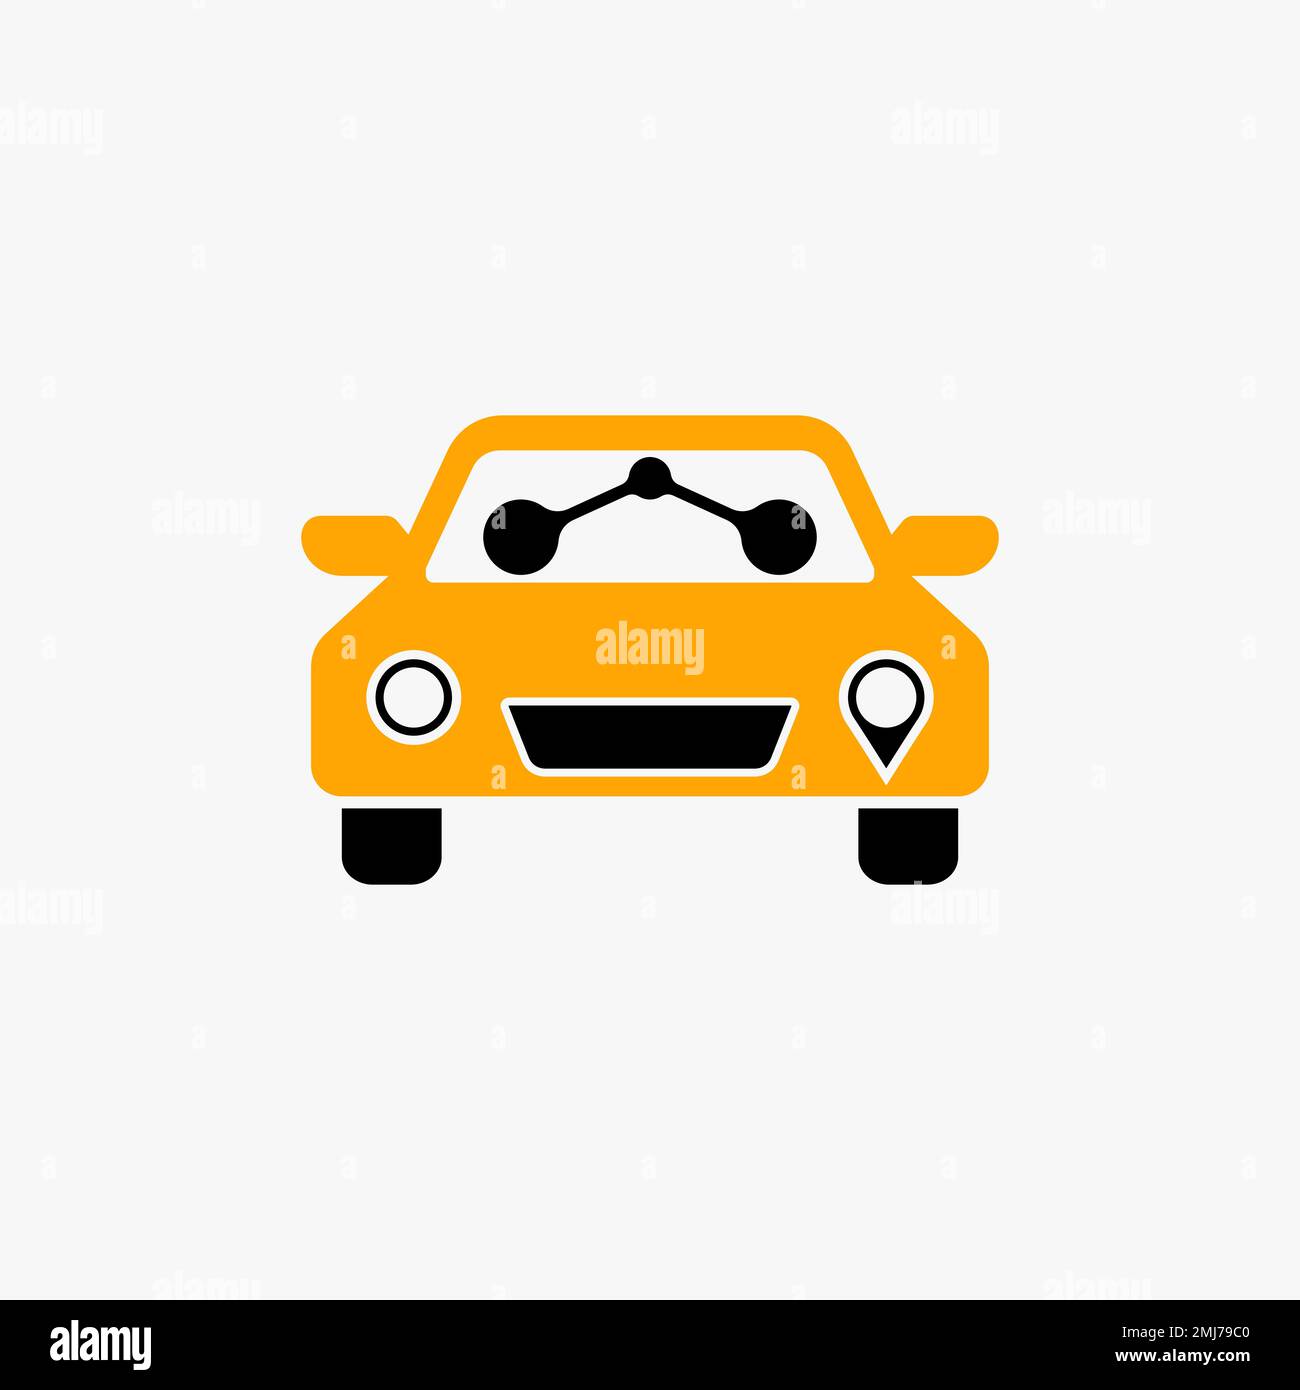 Simple and unique front mini small taxi car with two passengers image graphic icon logo design abstract concept vector stock transportation or mobile Stock Vector